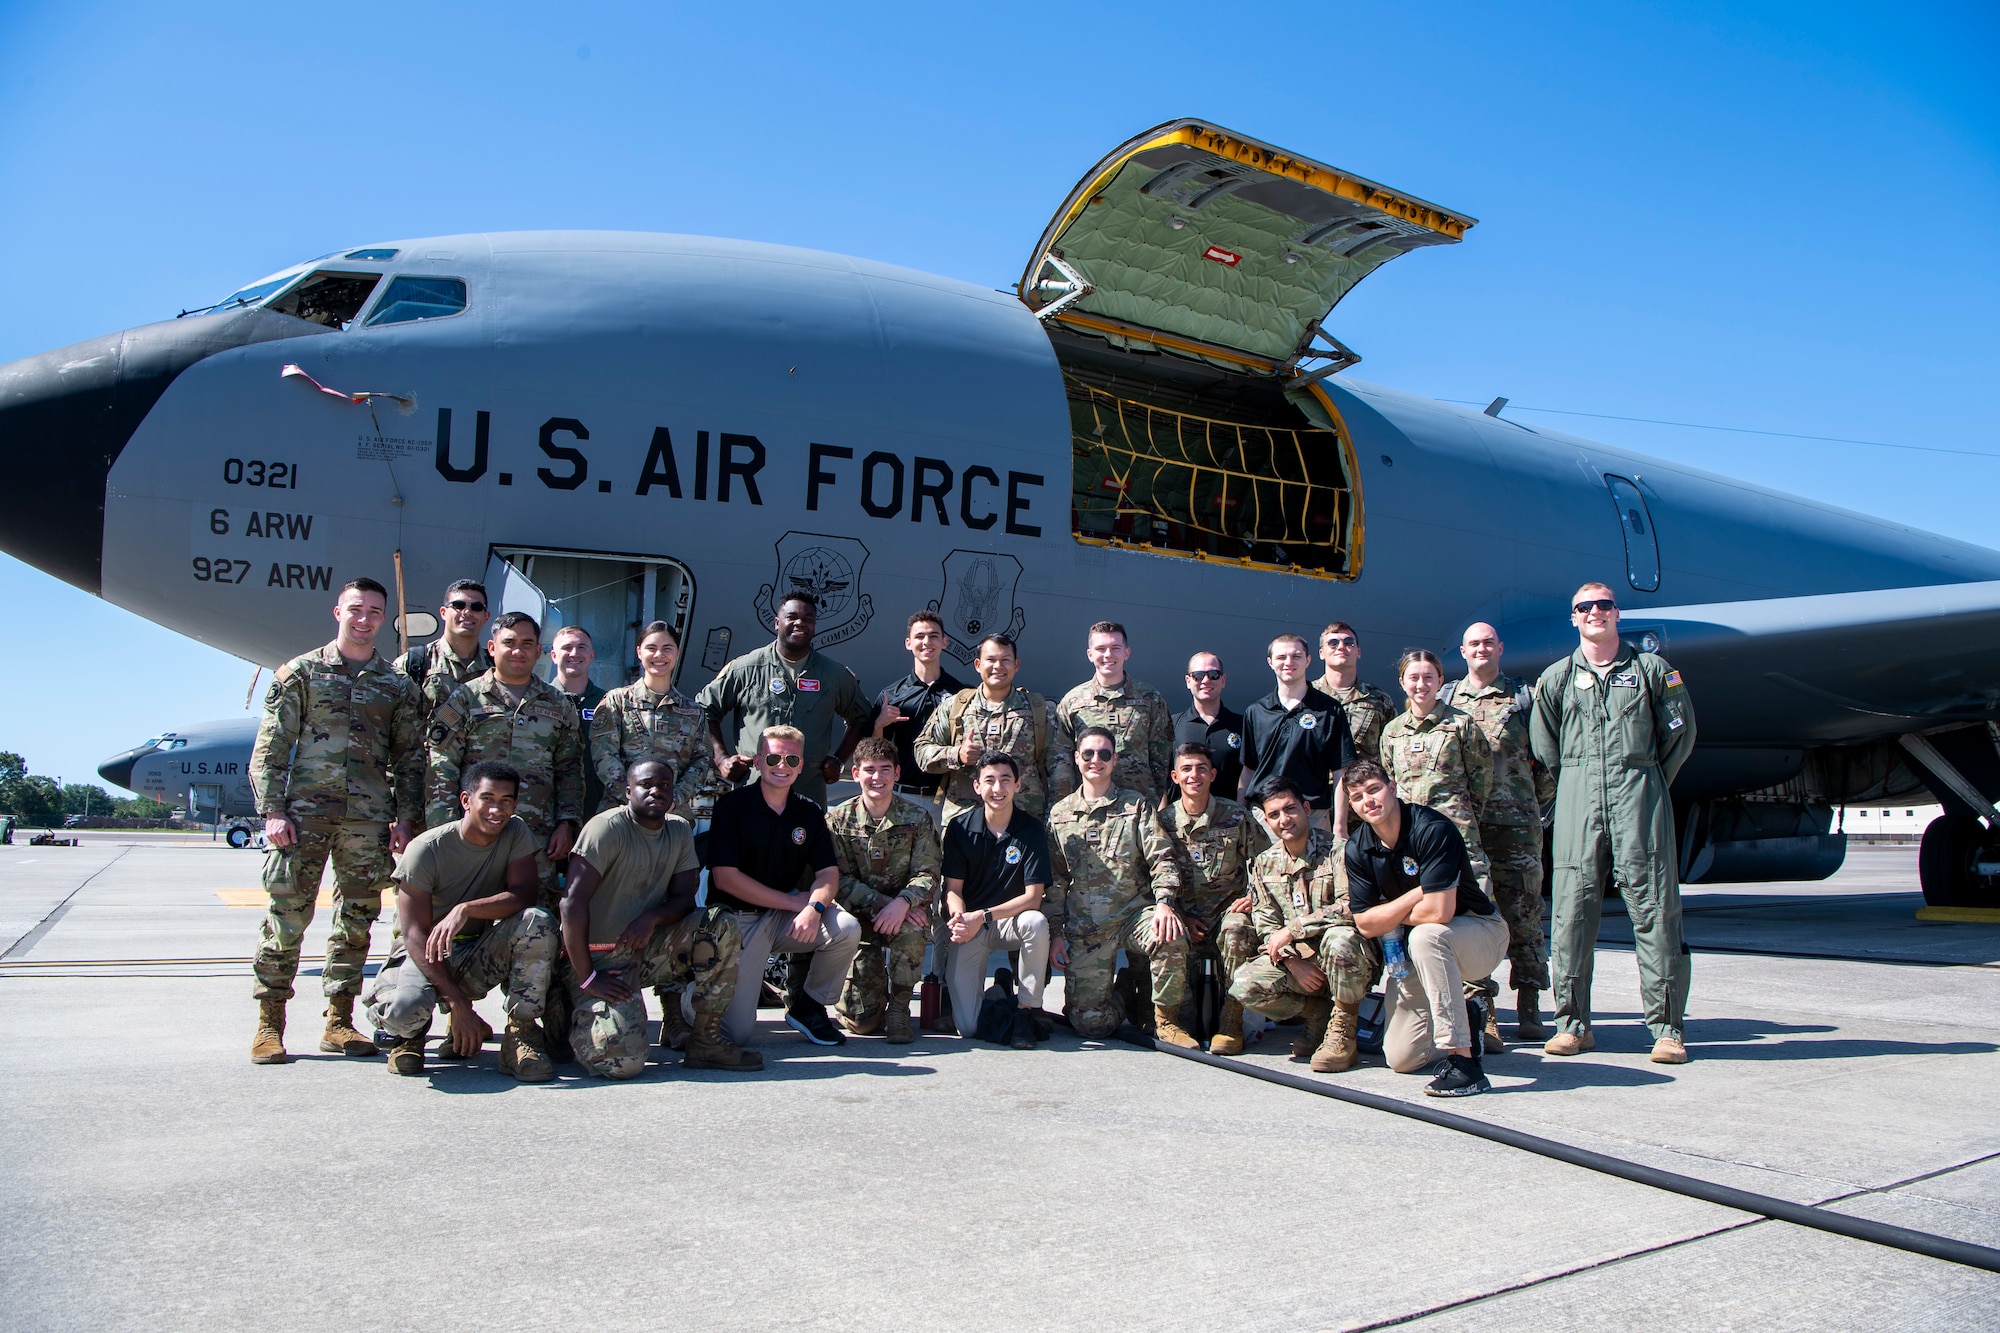 Cadets with Air Force ROTC Detachment 159 at the University of Central Florida pose for a photo in front of a KC-135 Stratotanker assigned to the 91st Air Refueling Squadron at MacDill Air Force Base, Florida, April 11, 2022.